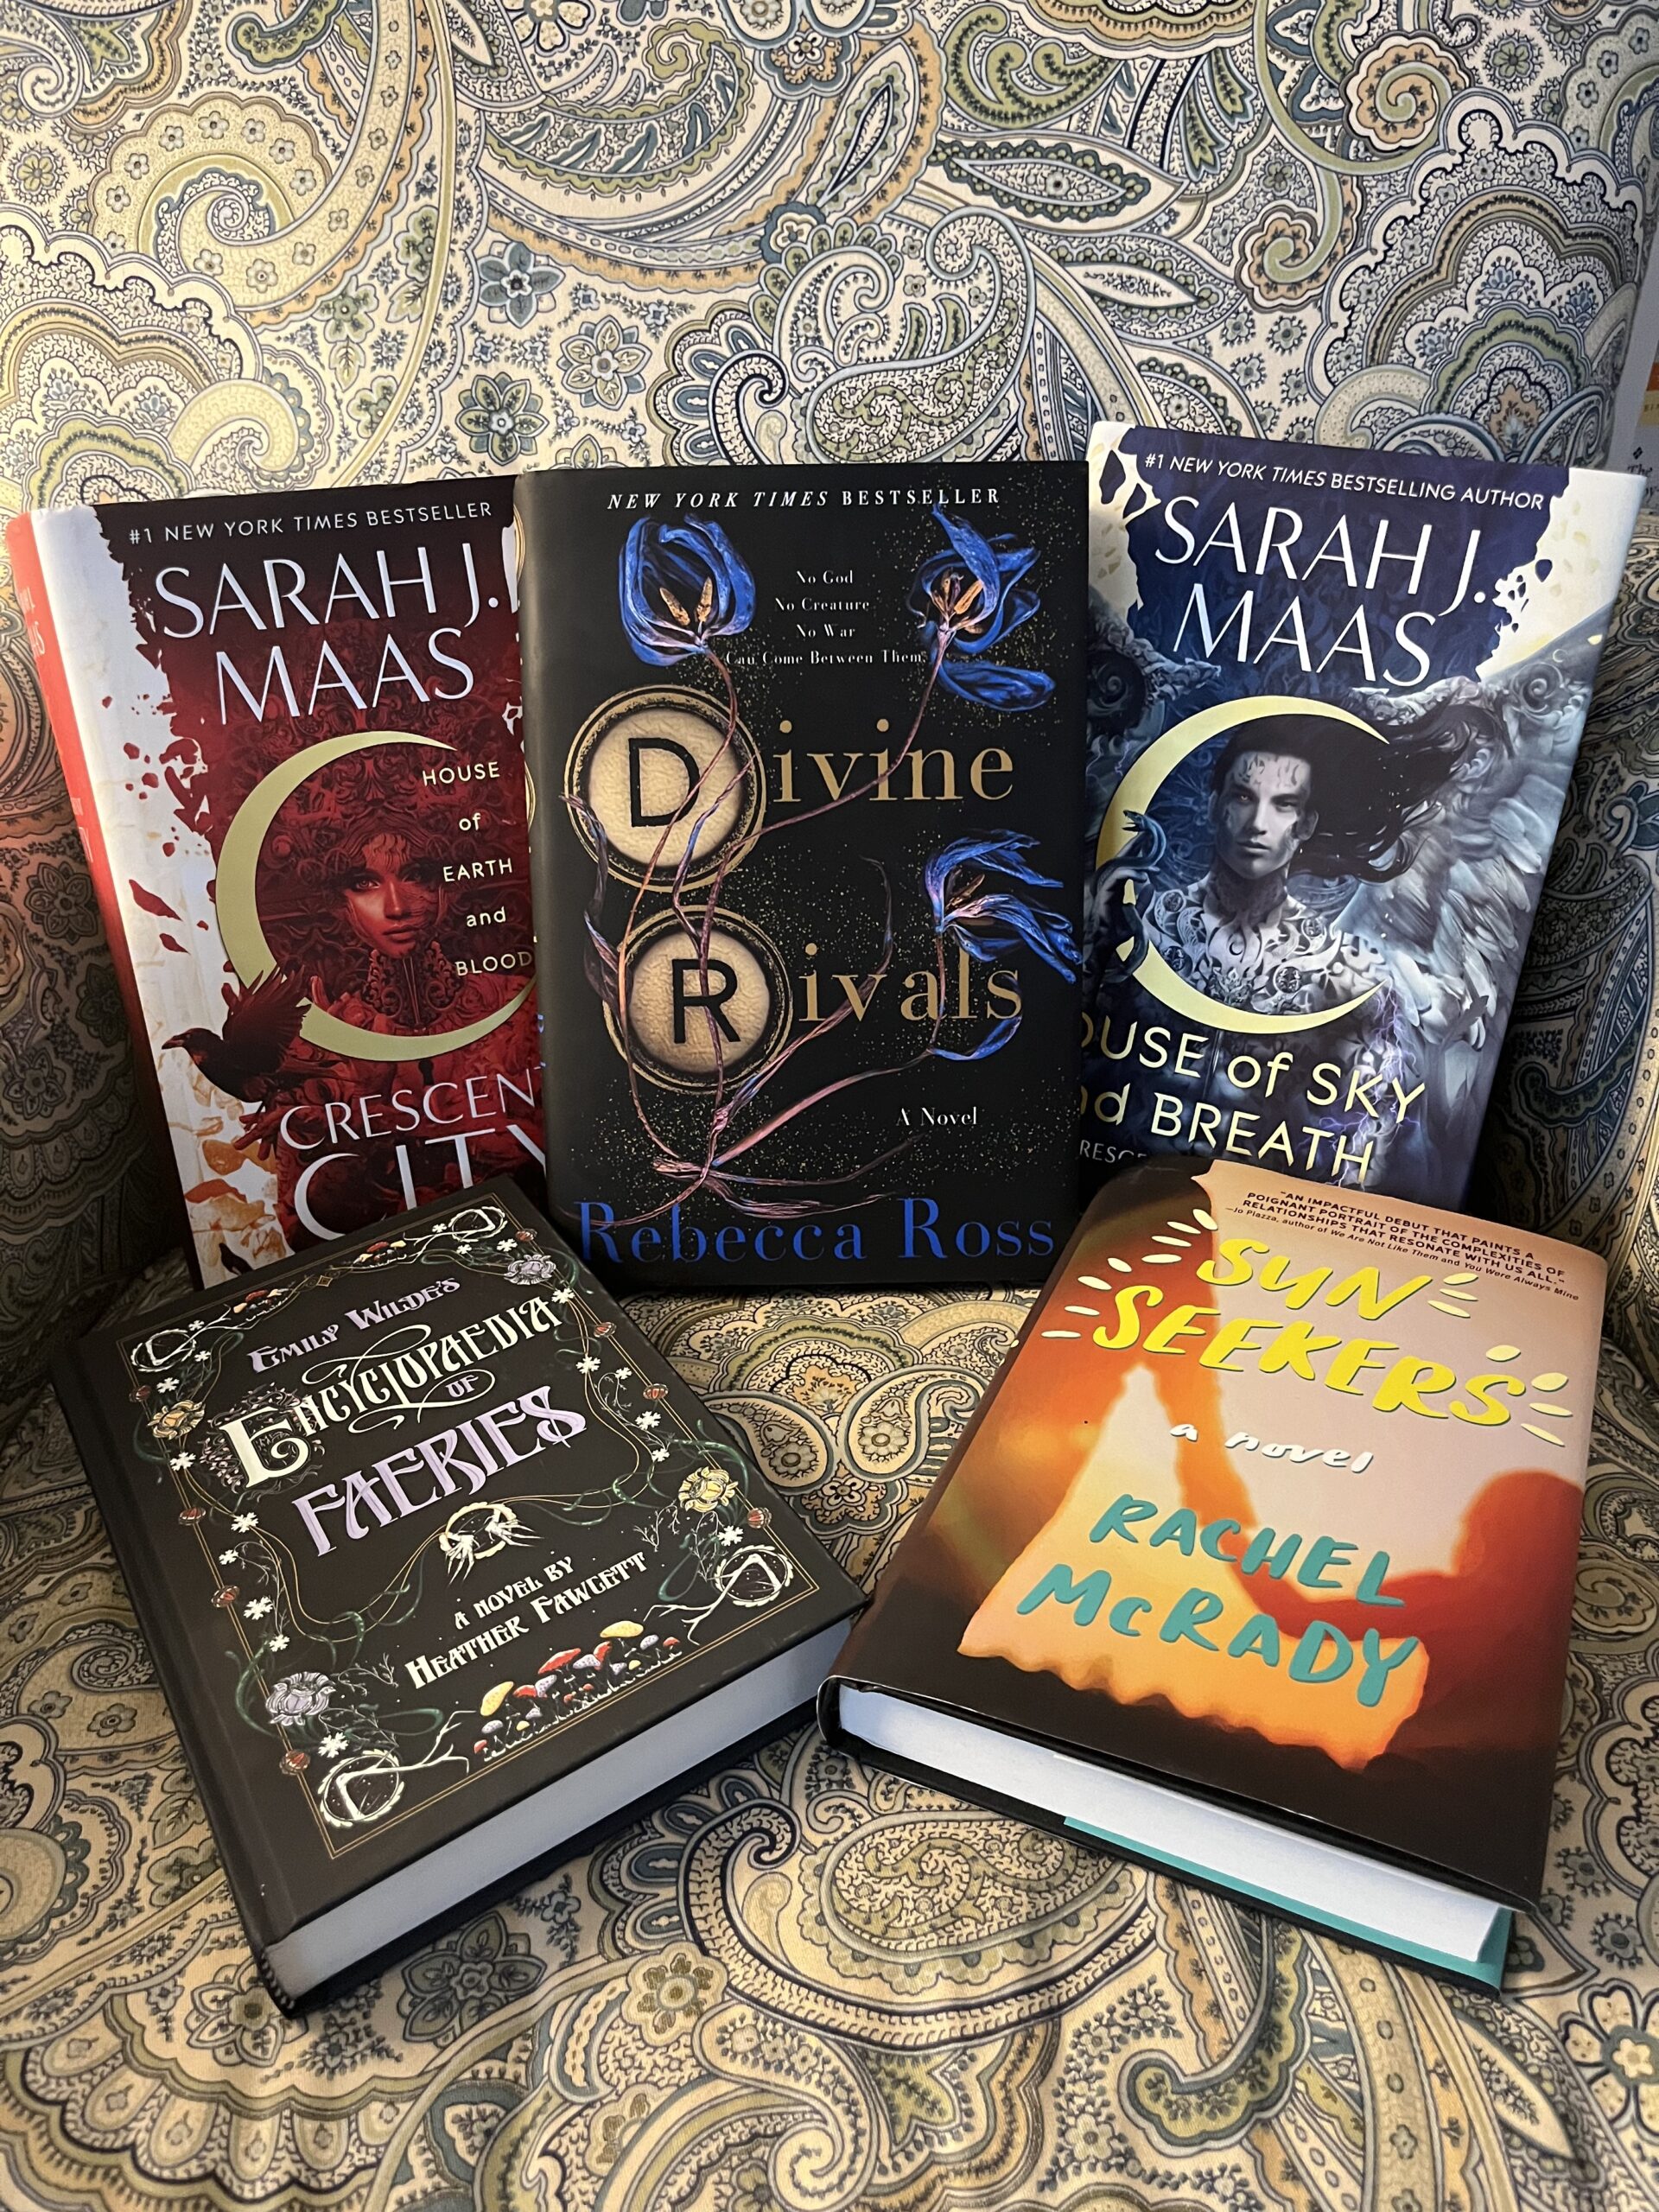 Physical books read in January: Crescent City 1 and 2, Divine Rivals, Emily Wilde's Encyclopaedia of Faeries, and Sun Seekers.